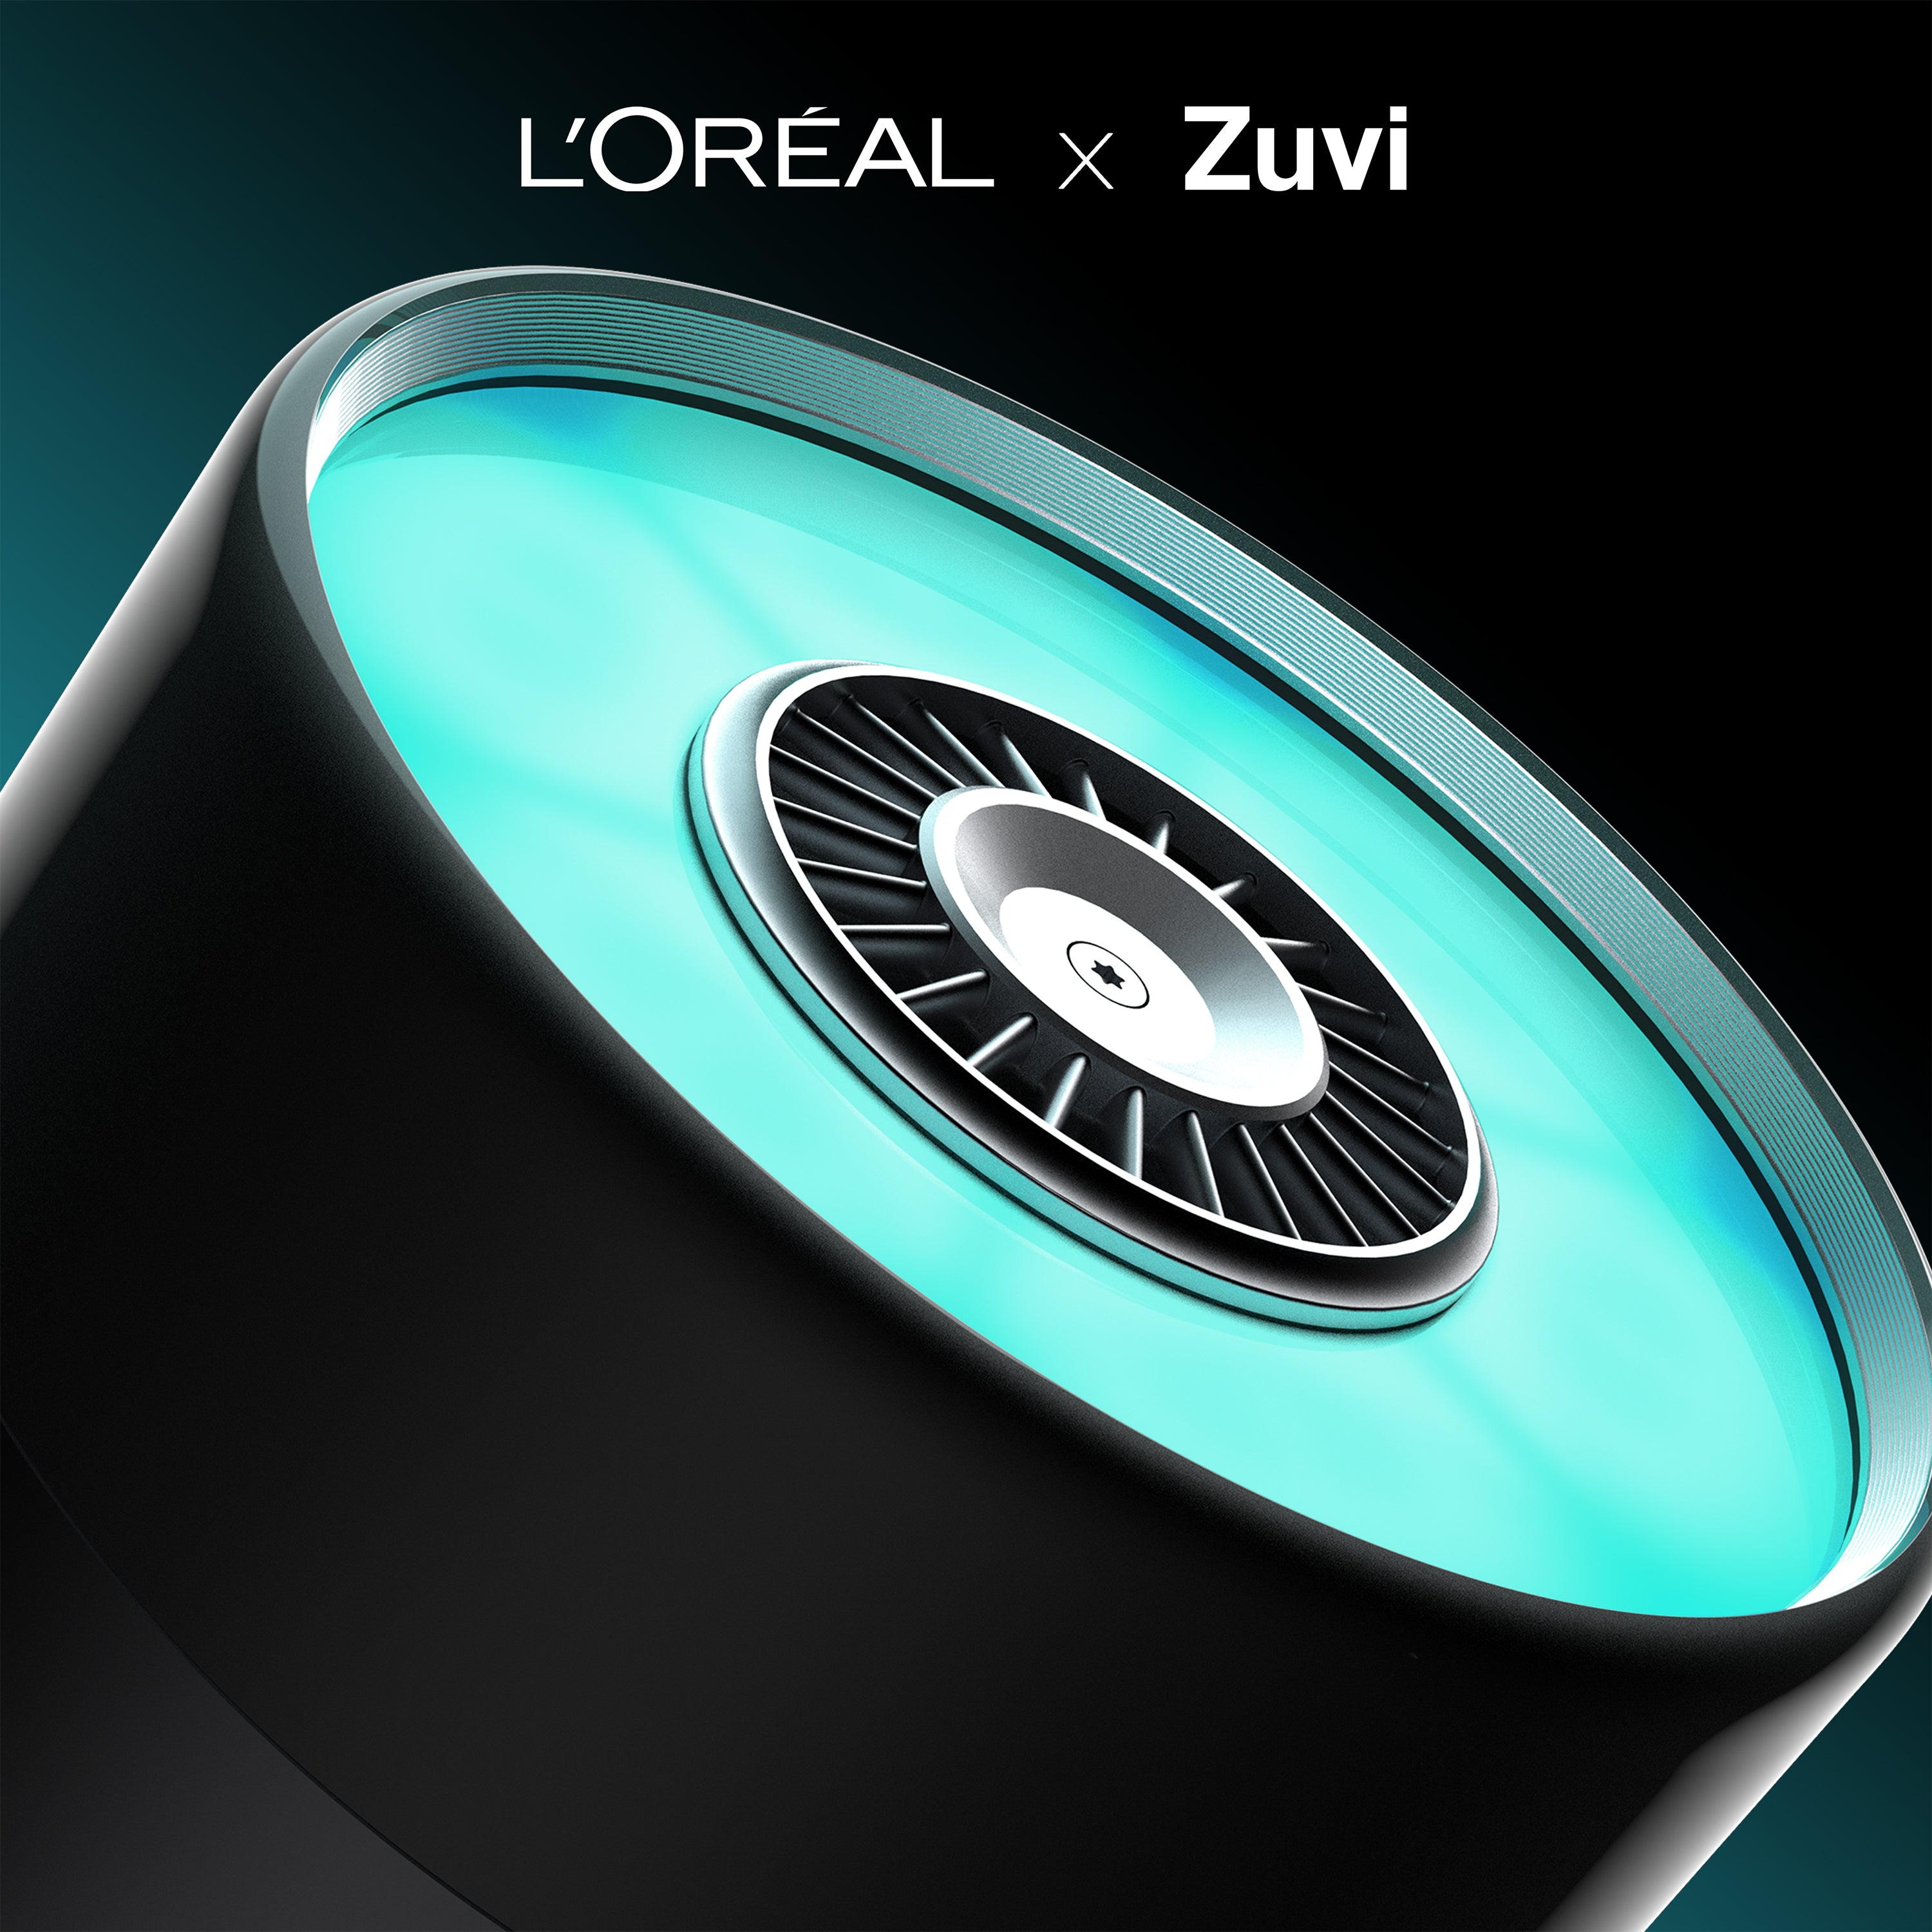 Zuvi Announces Investment by L'Oréal Groupe's BOLD Corporate Venture Fund and Launch of AirLight Pro, Next-generation Hair Drying Tool